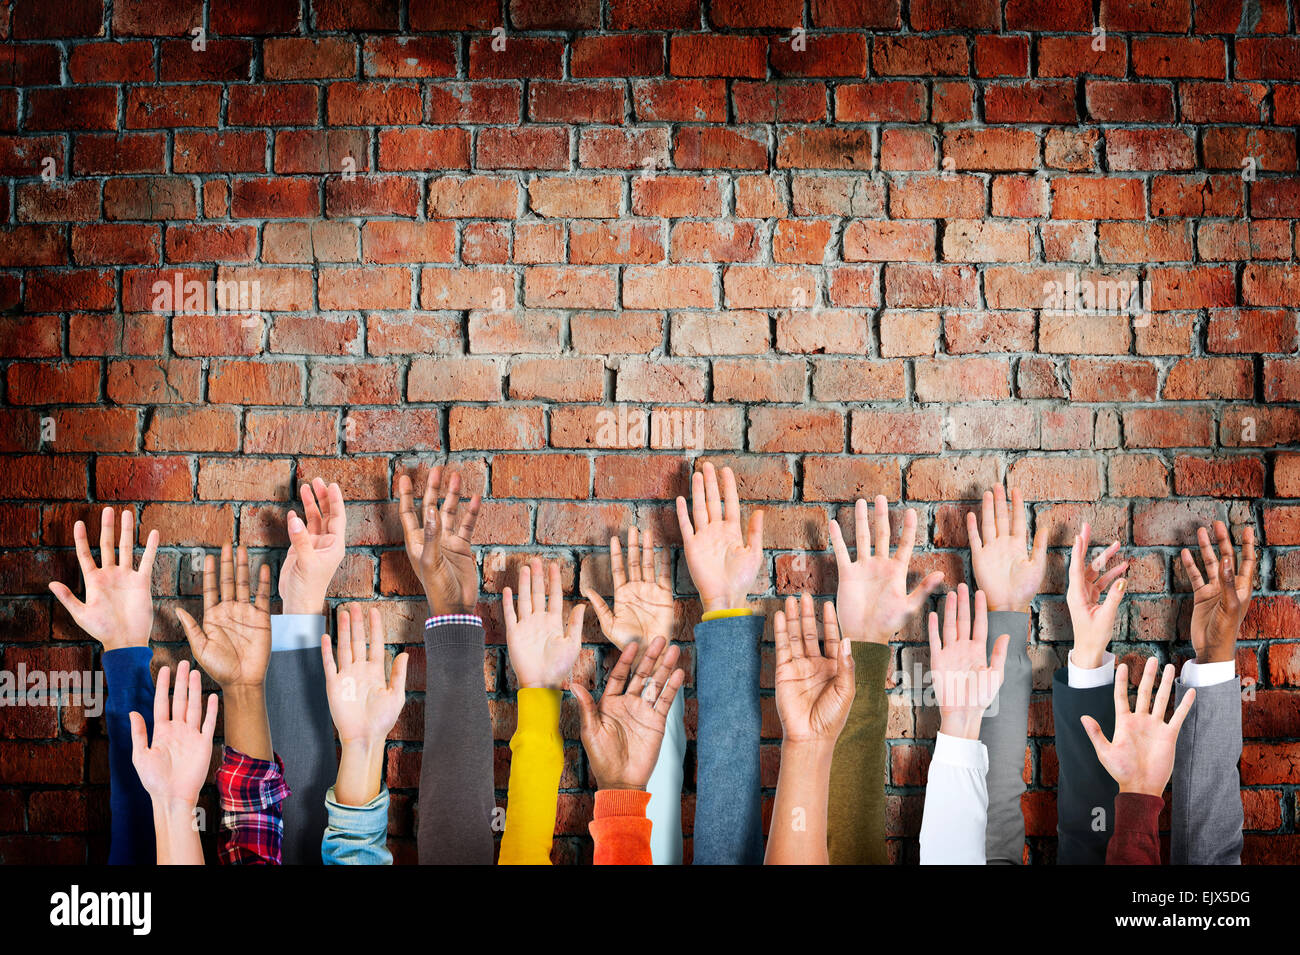 Group of Diverse People's Hands Raised Stock Photo